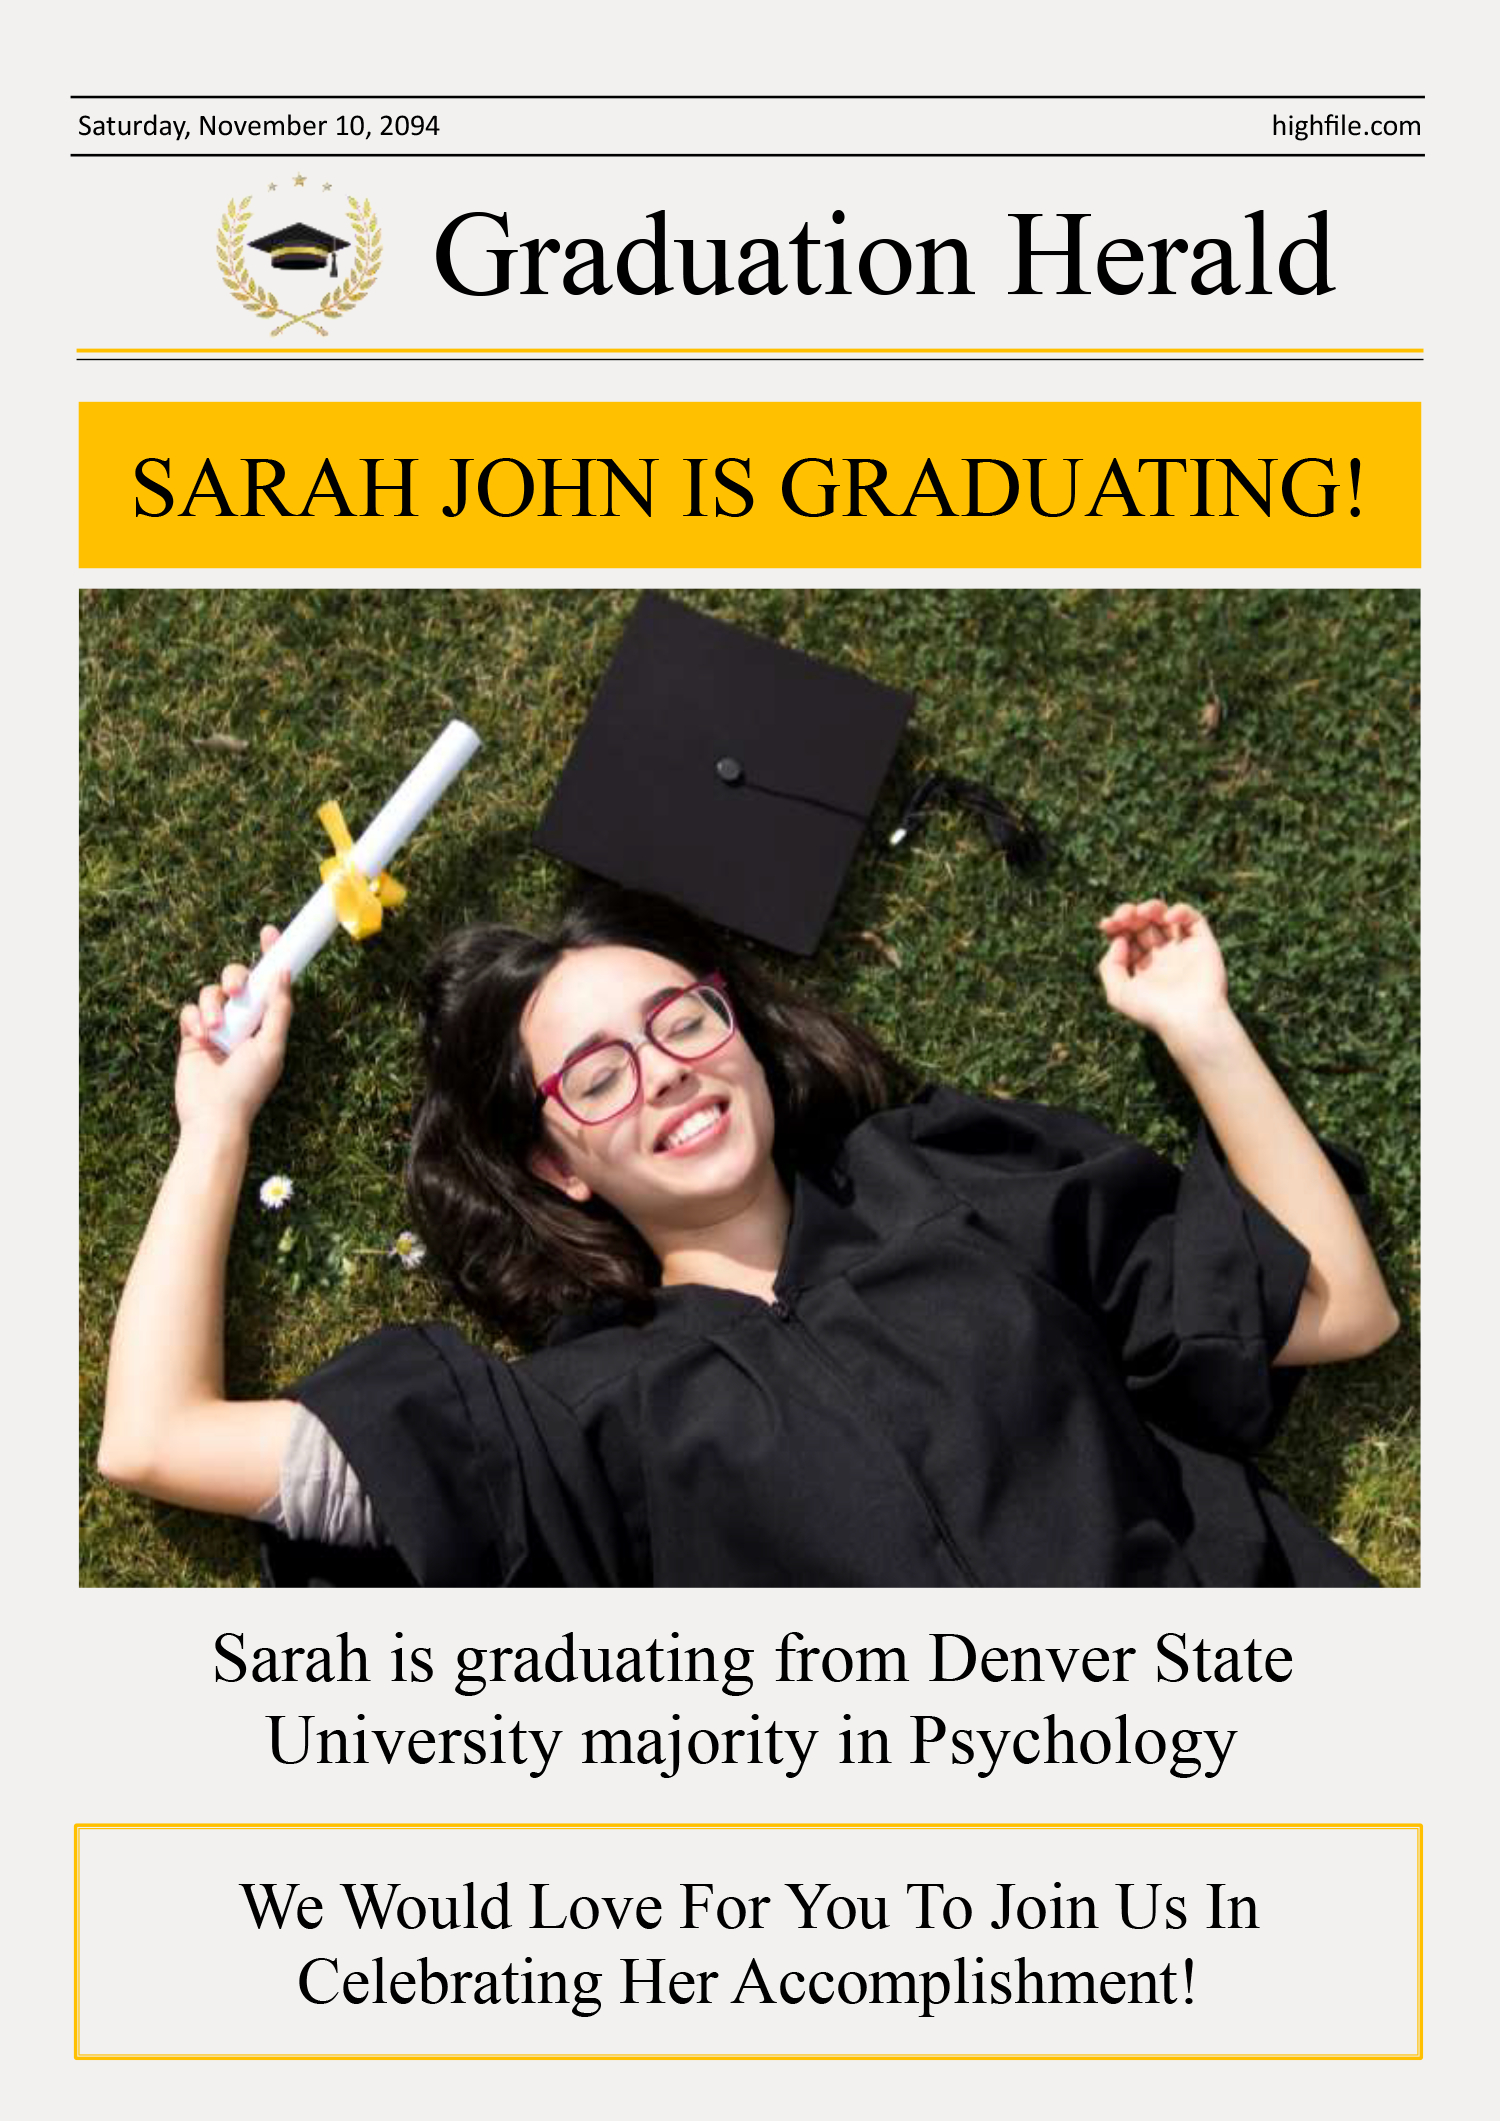 Yellow Graduation Newspaper Template - Front Page